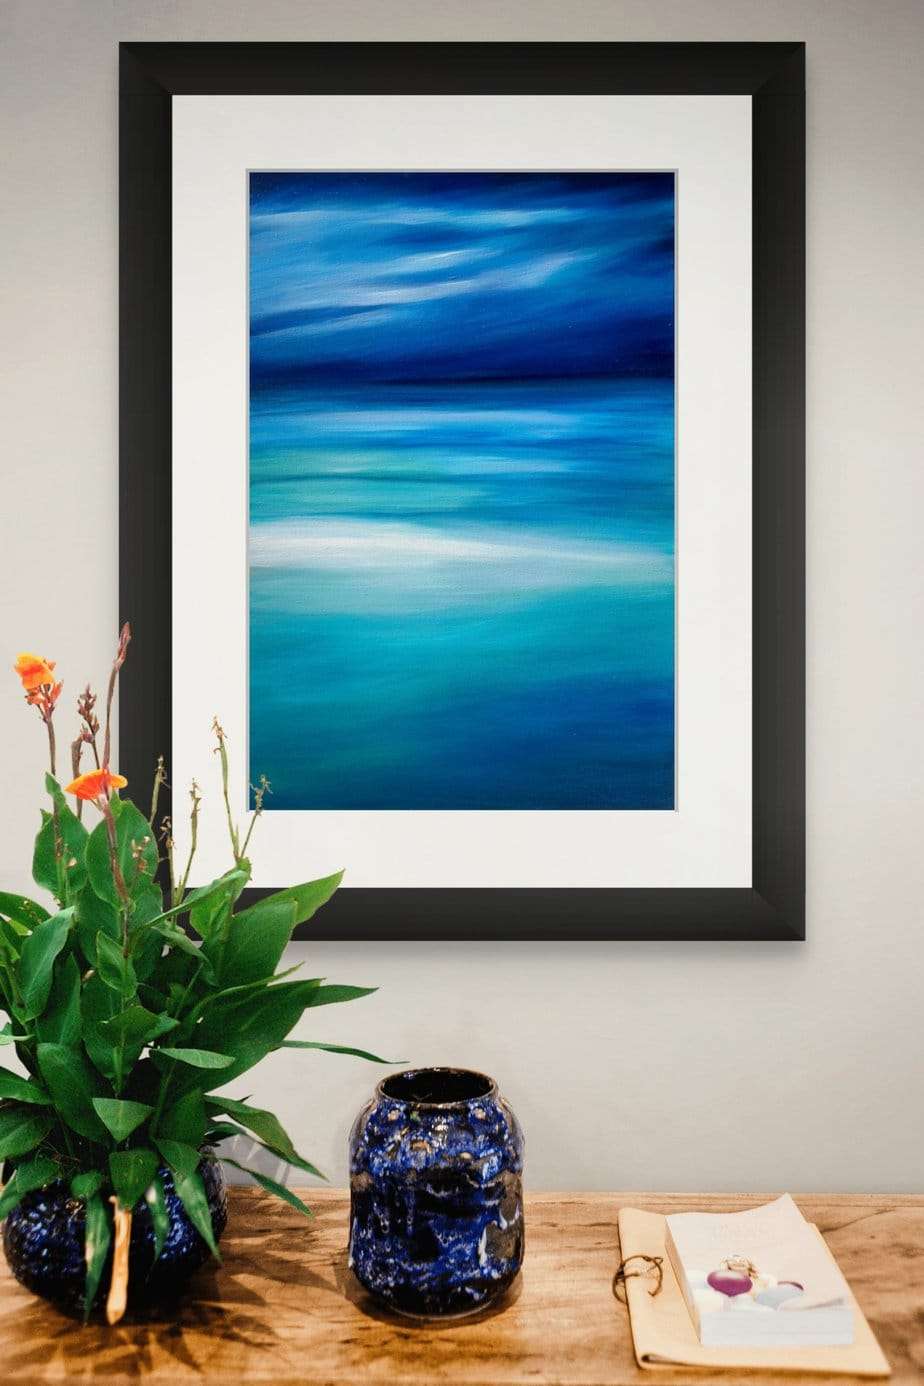 Turquoise Abstract Sea in a room setting